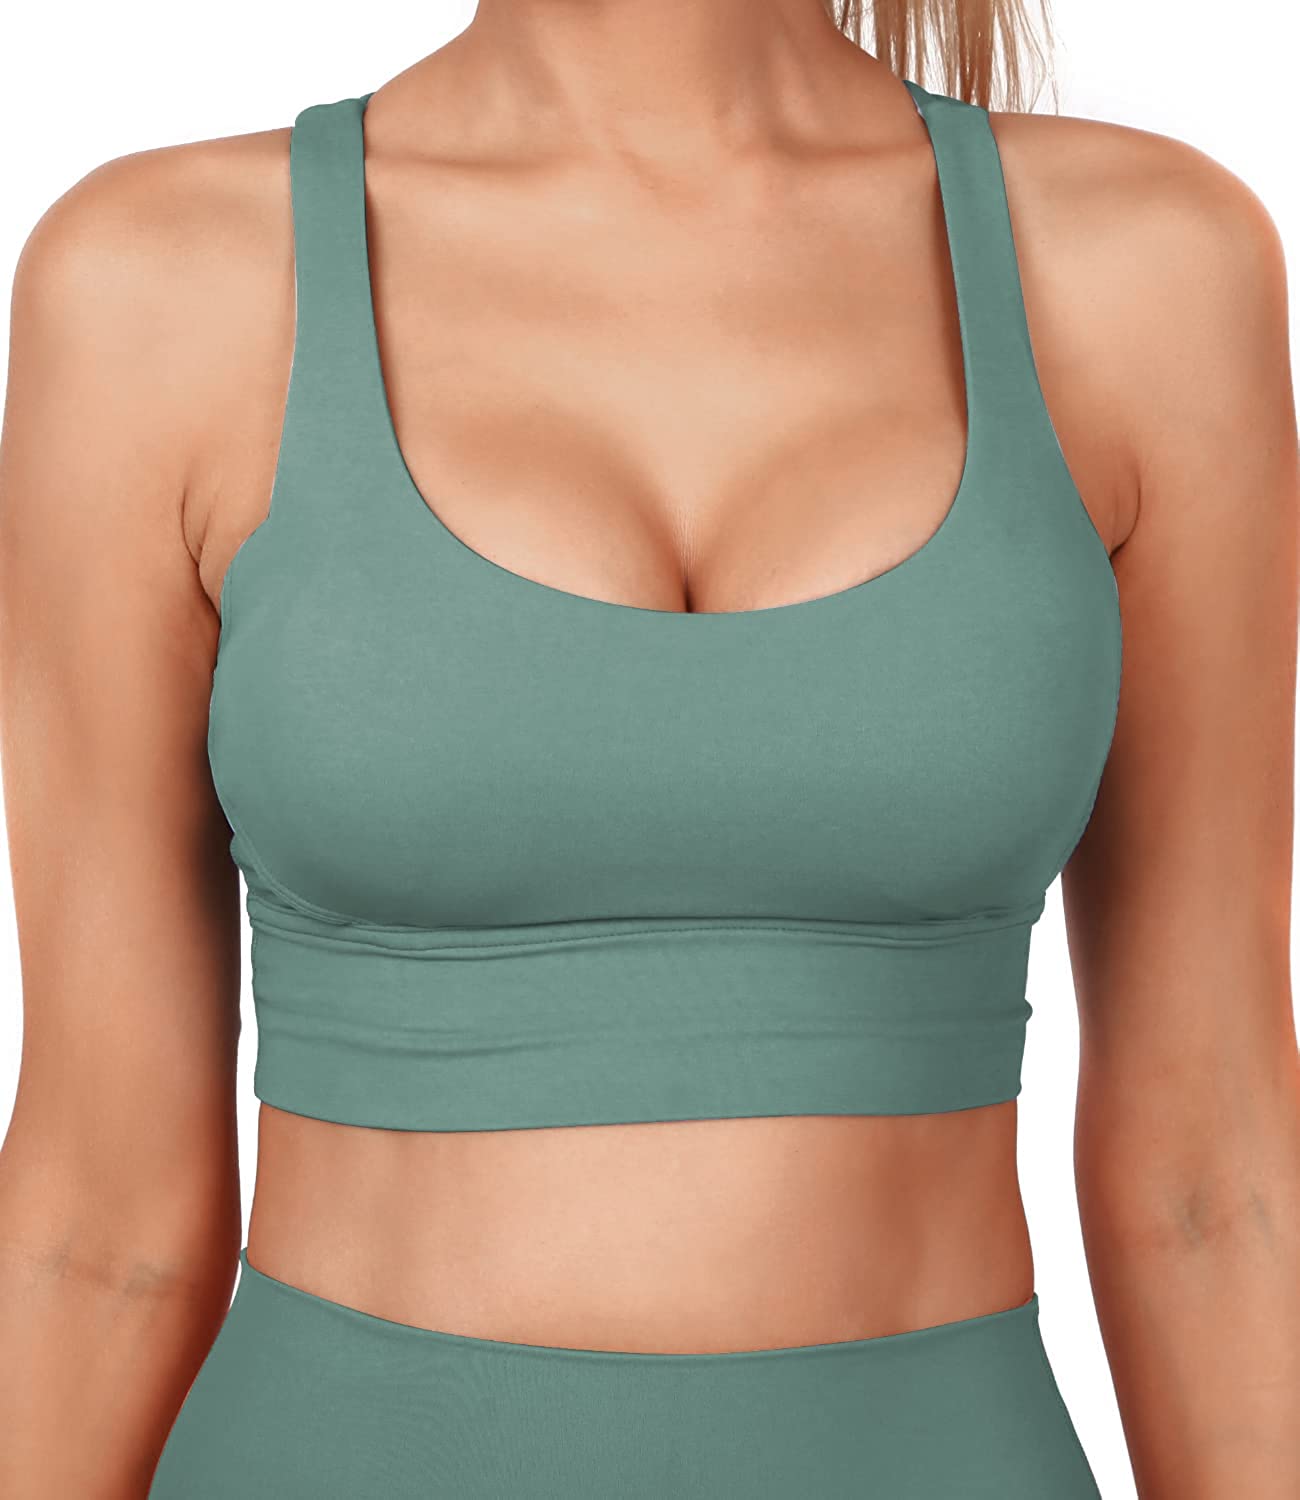 Nike Grey Dri-Fit Sports Bra Size Large - $27 New With Tags - From Paloma